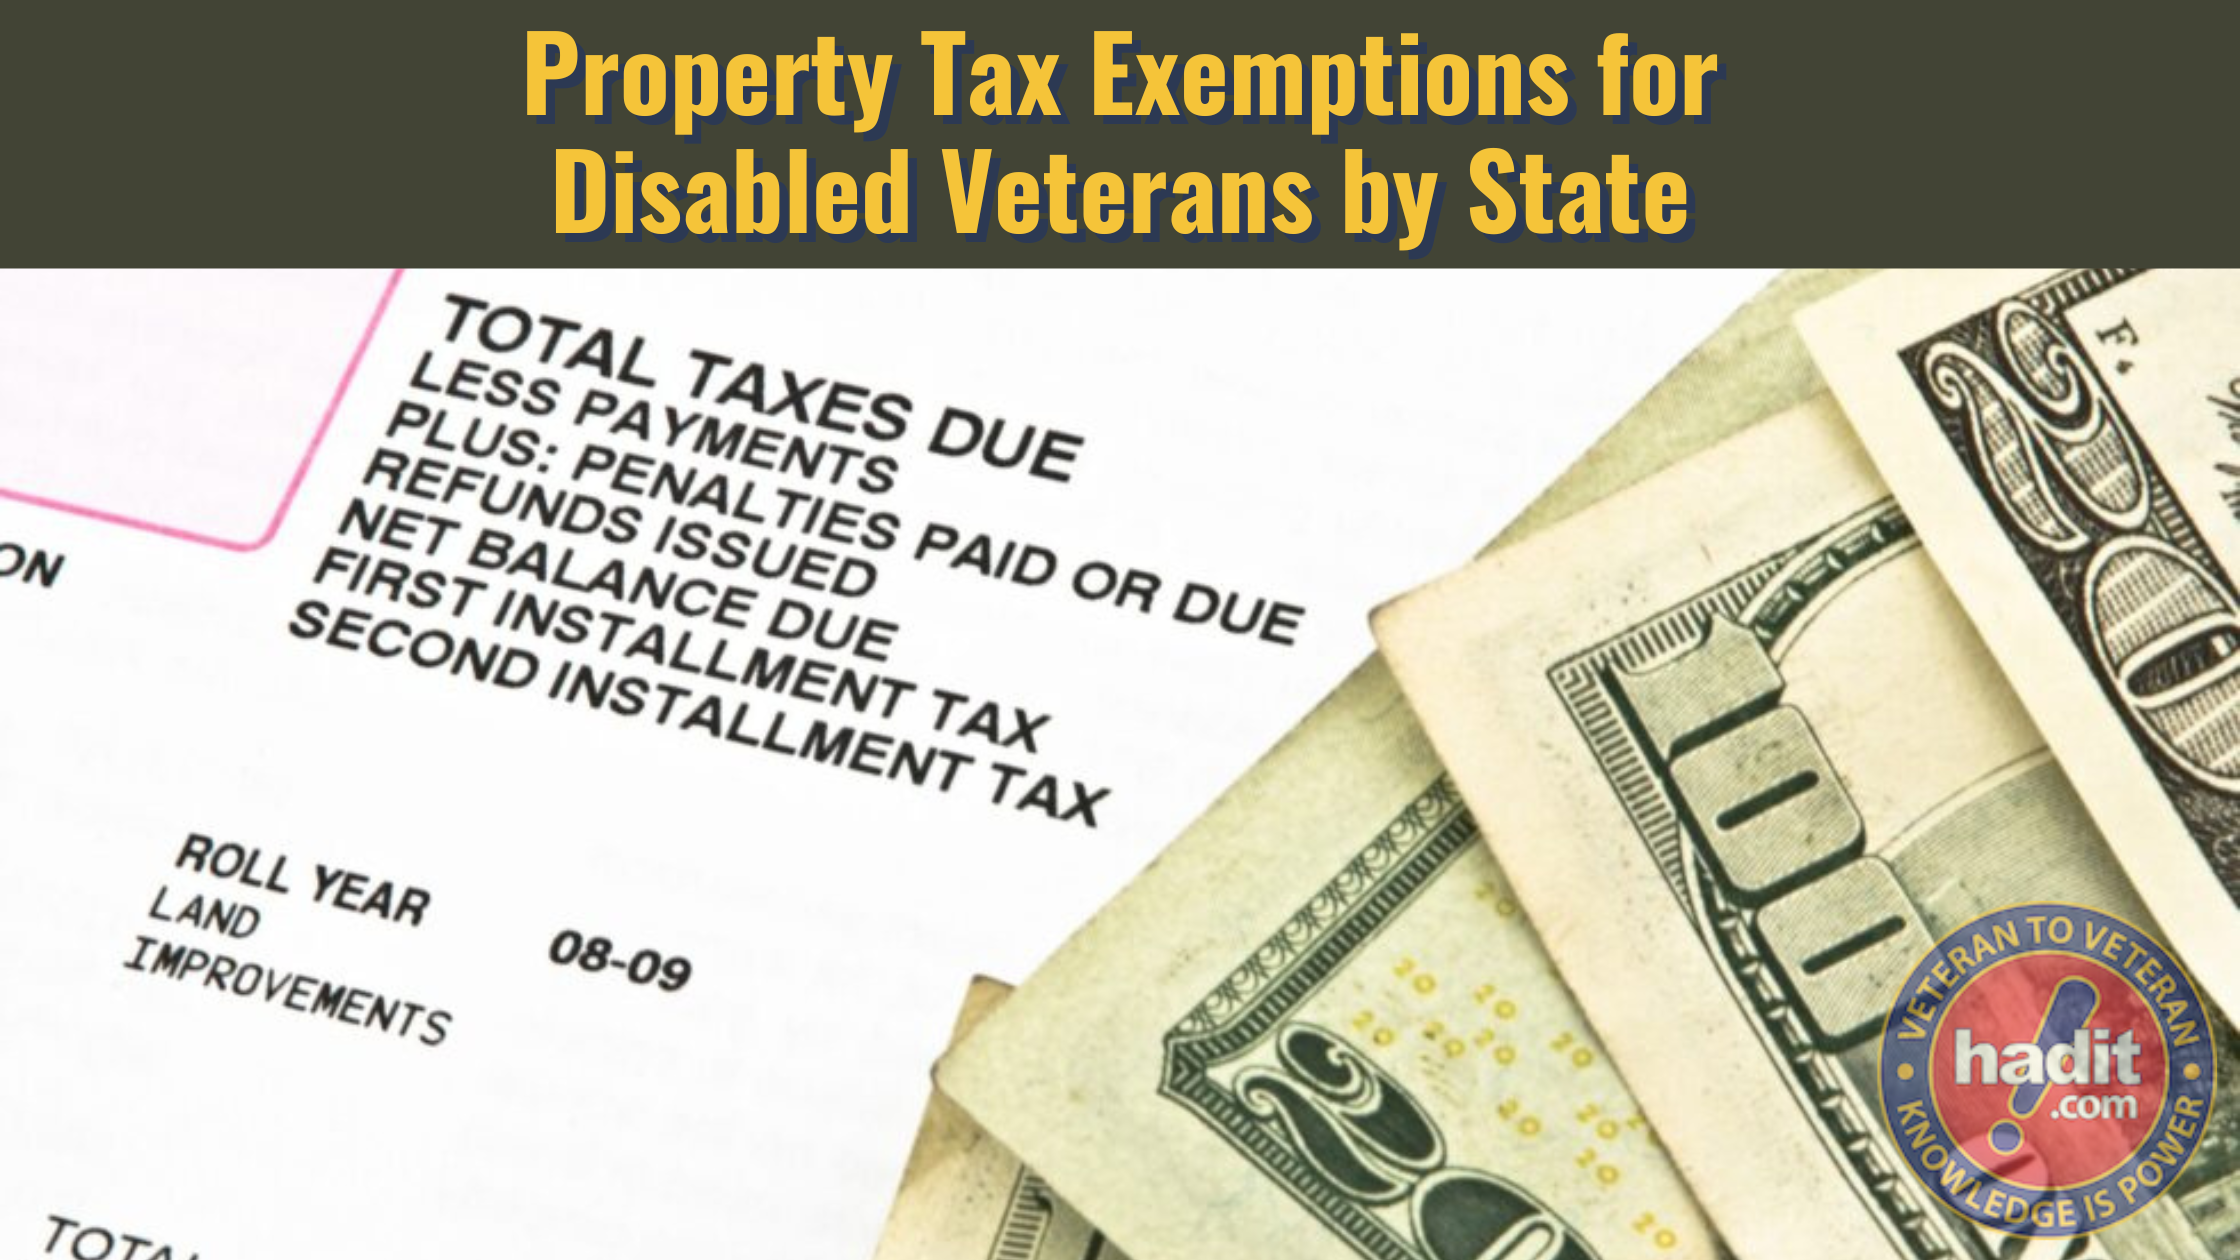 The image features a header "Property Tax Exemptions for Disabled Veterans by State" with a partial view of a property tax bill and a pile of U.S. currency notes to the right. In the bottom right corner is a circular logo with the text "Veteran to Veteran" and "hadit.com" with the slogan "Knowledge is Power."